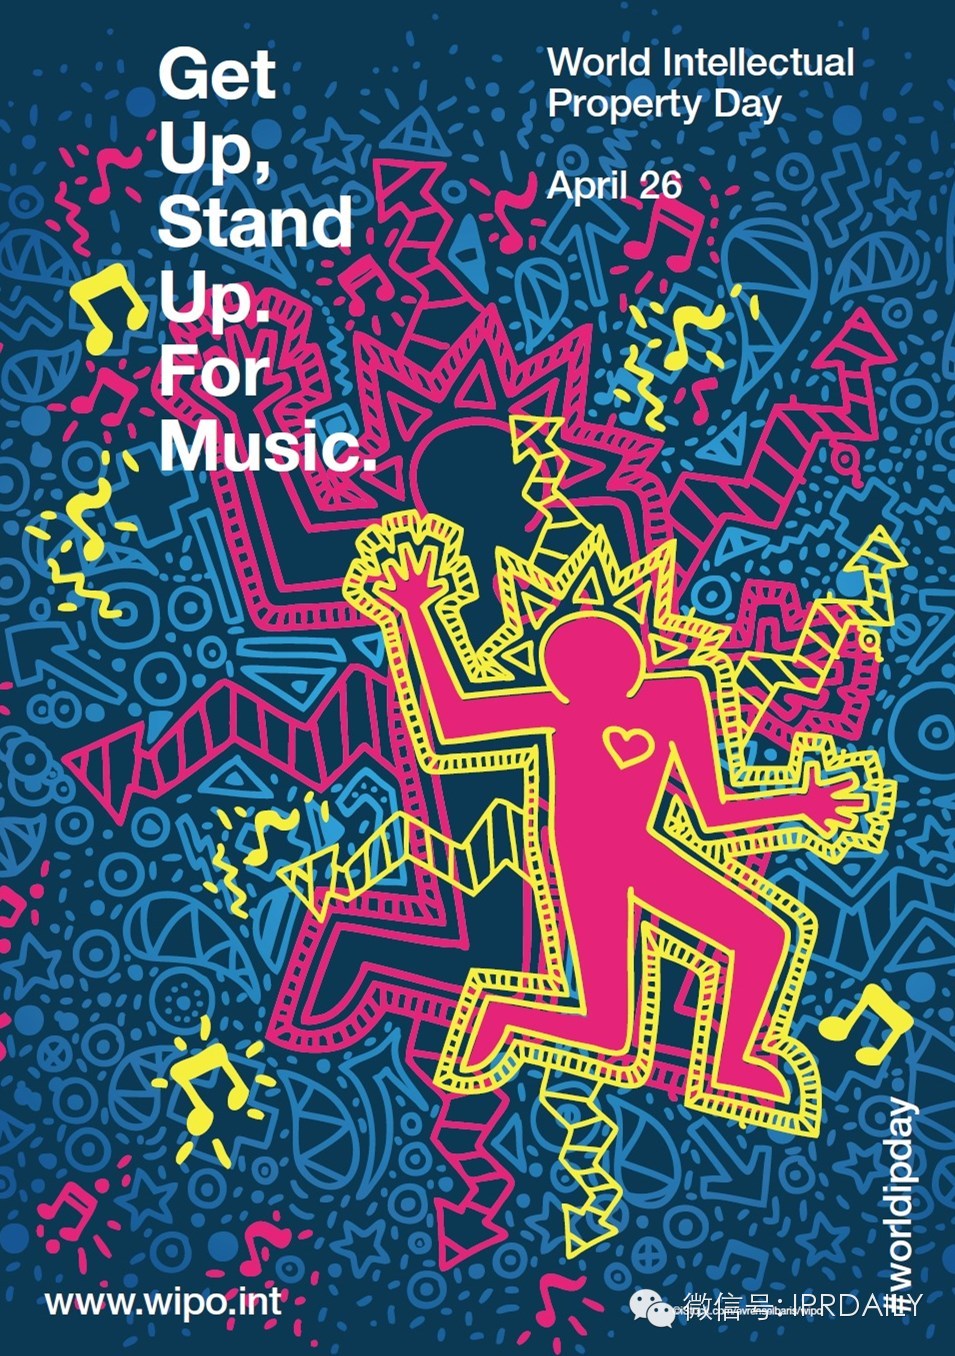 WIPO发布2015年世界知识产权日主题：Get up, stand up. For music